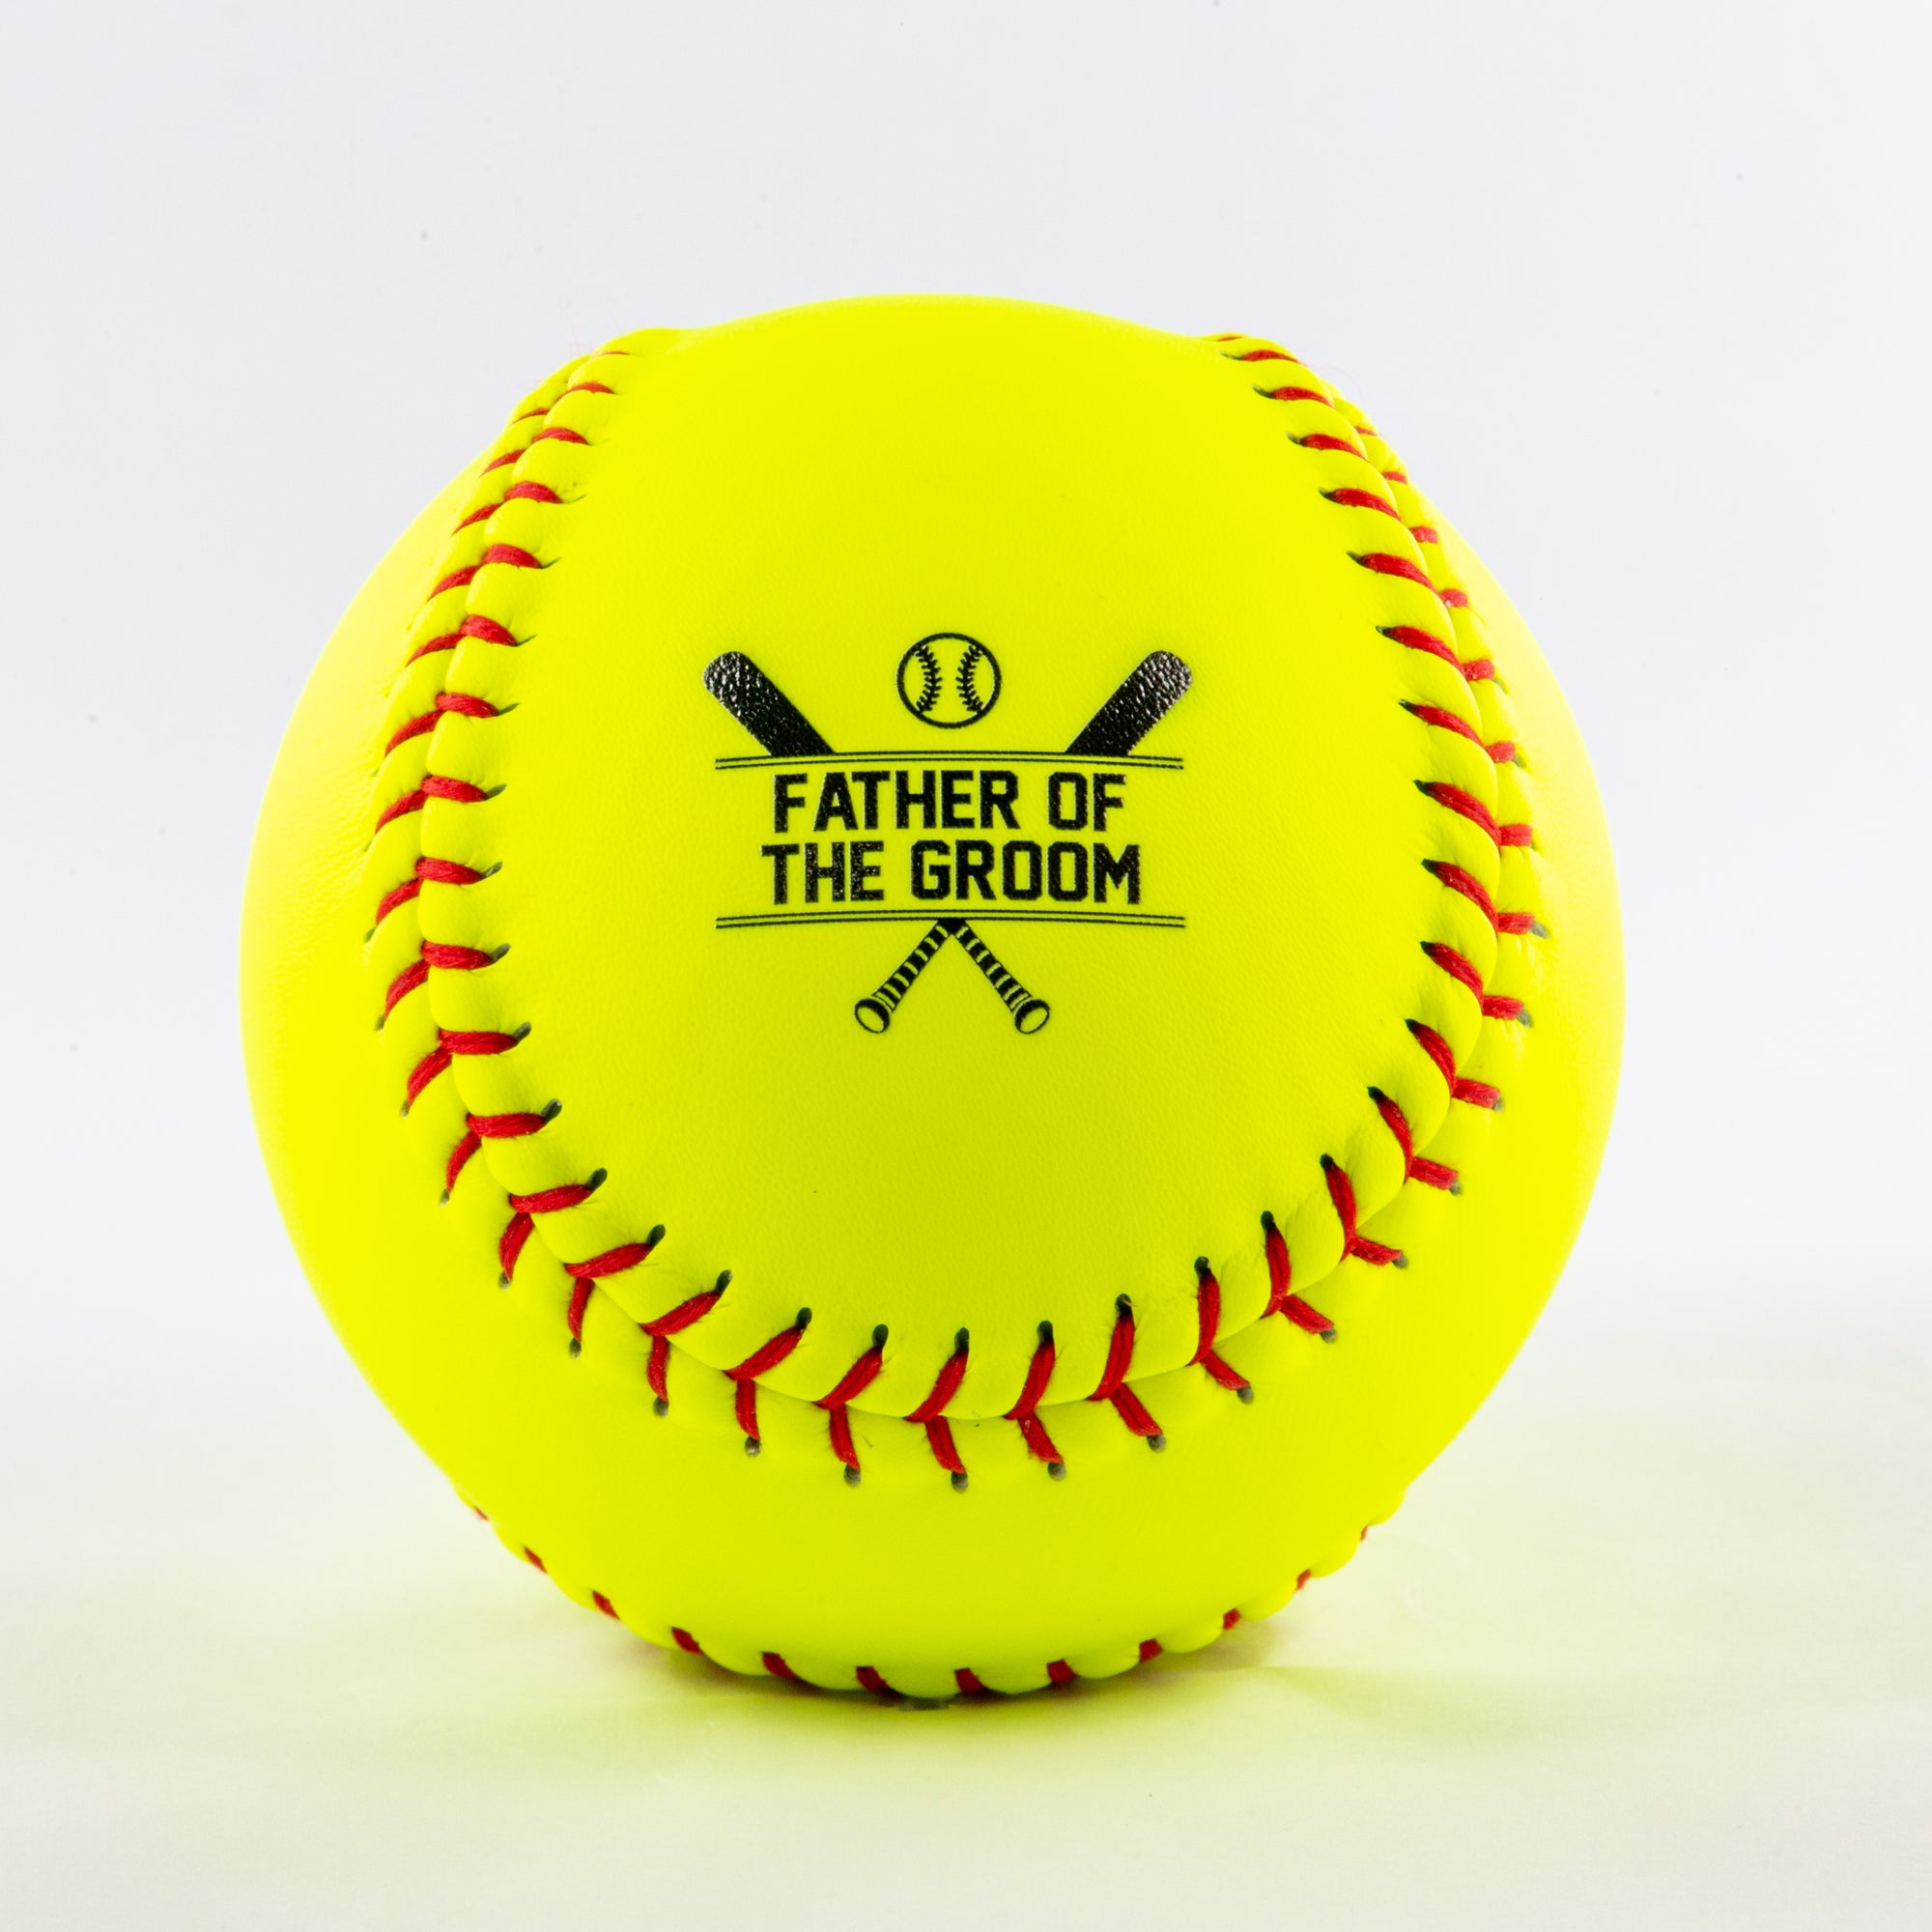 Printed Softball with Father of the Groom Design